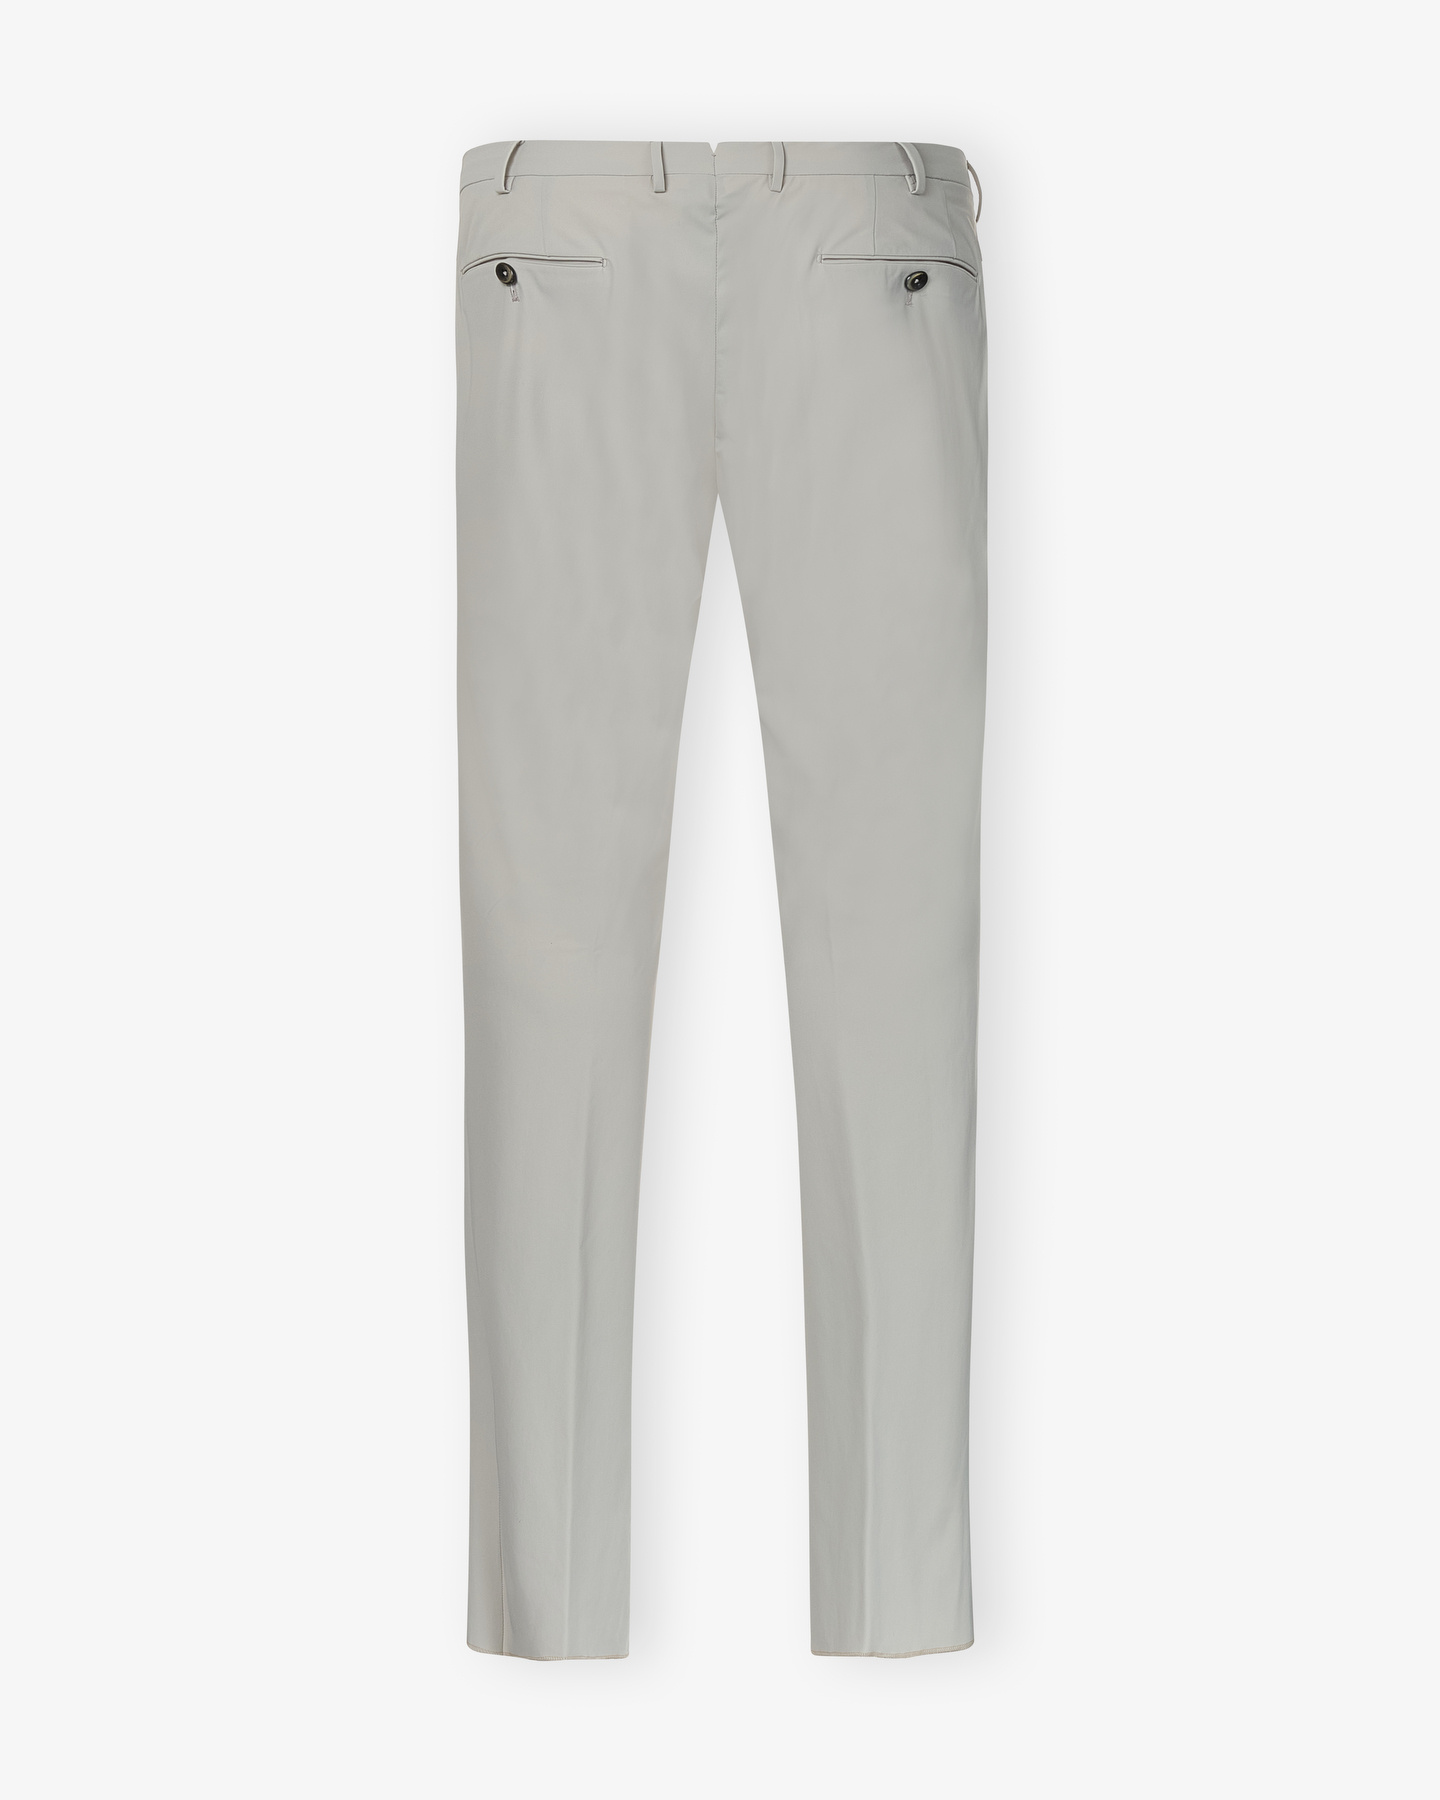 PT PT - Trouser technical wool with stretch - Light grey